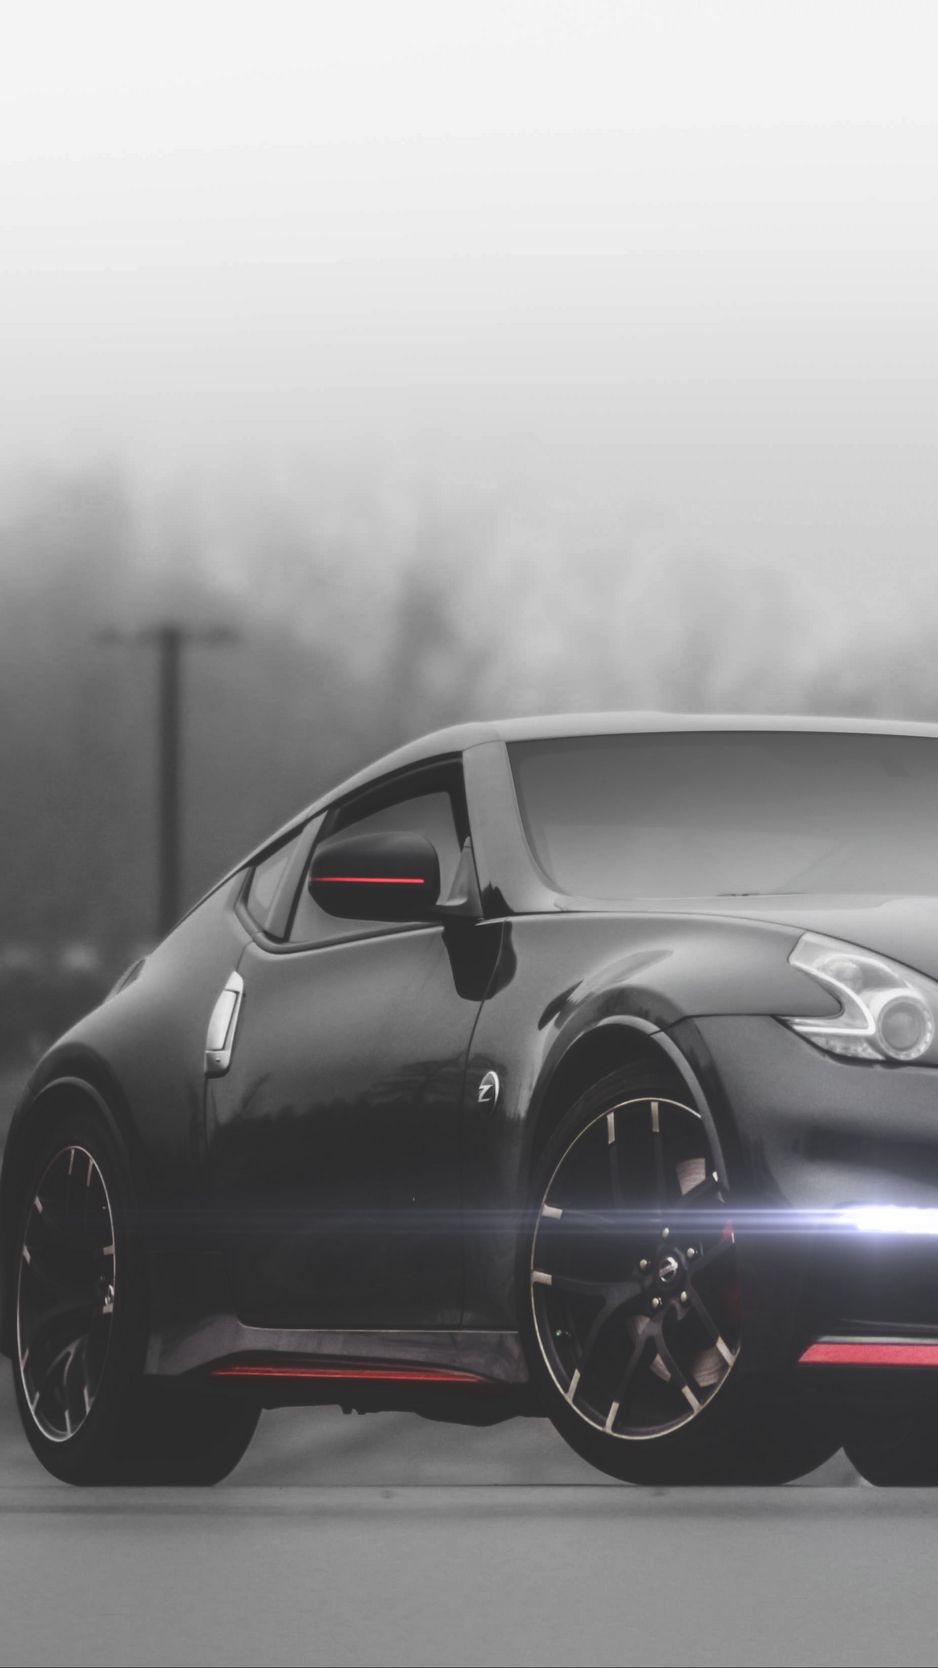 Download wallpaper 938x1668 nissan 370z nissan car white back view  iphone 876s6 for parallax hd background